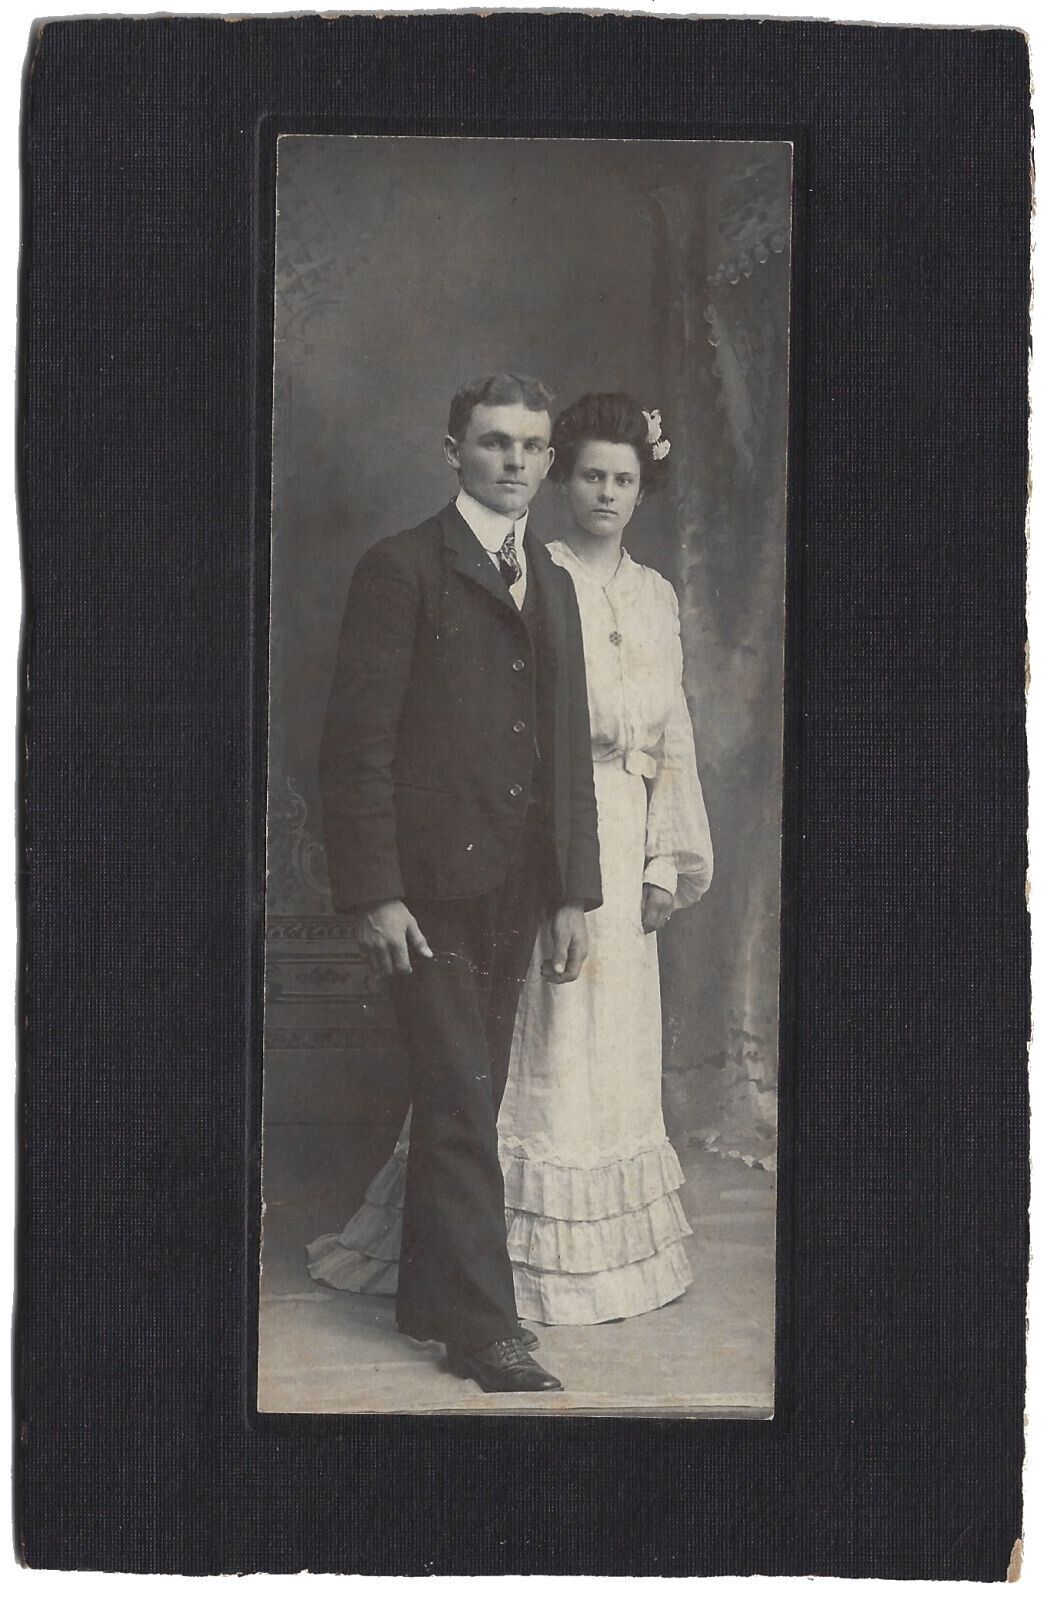 Man Standing in Front of Woman Full Length Dress Vintage Photo